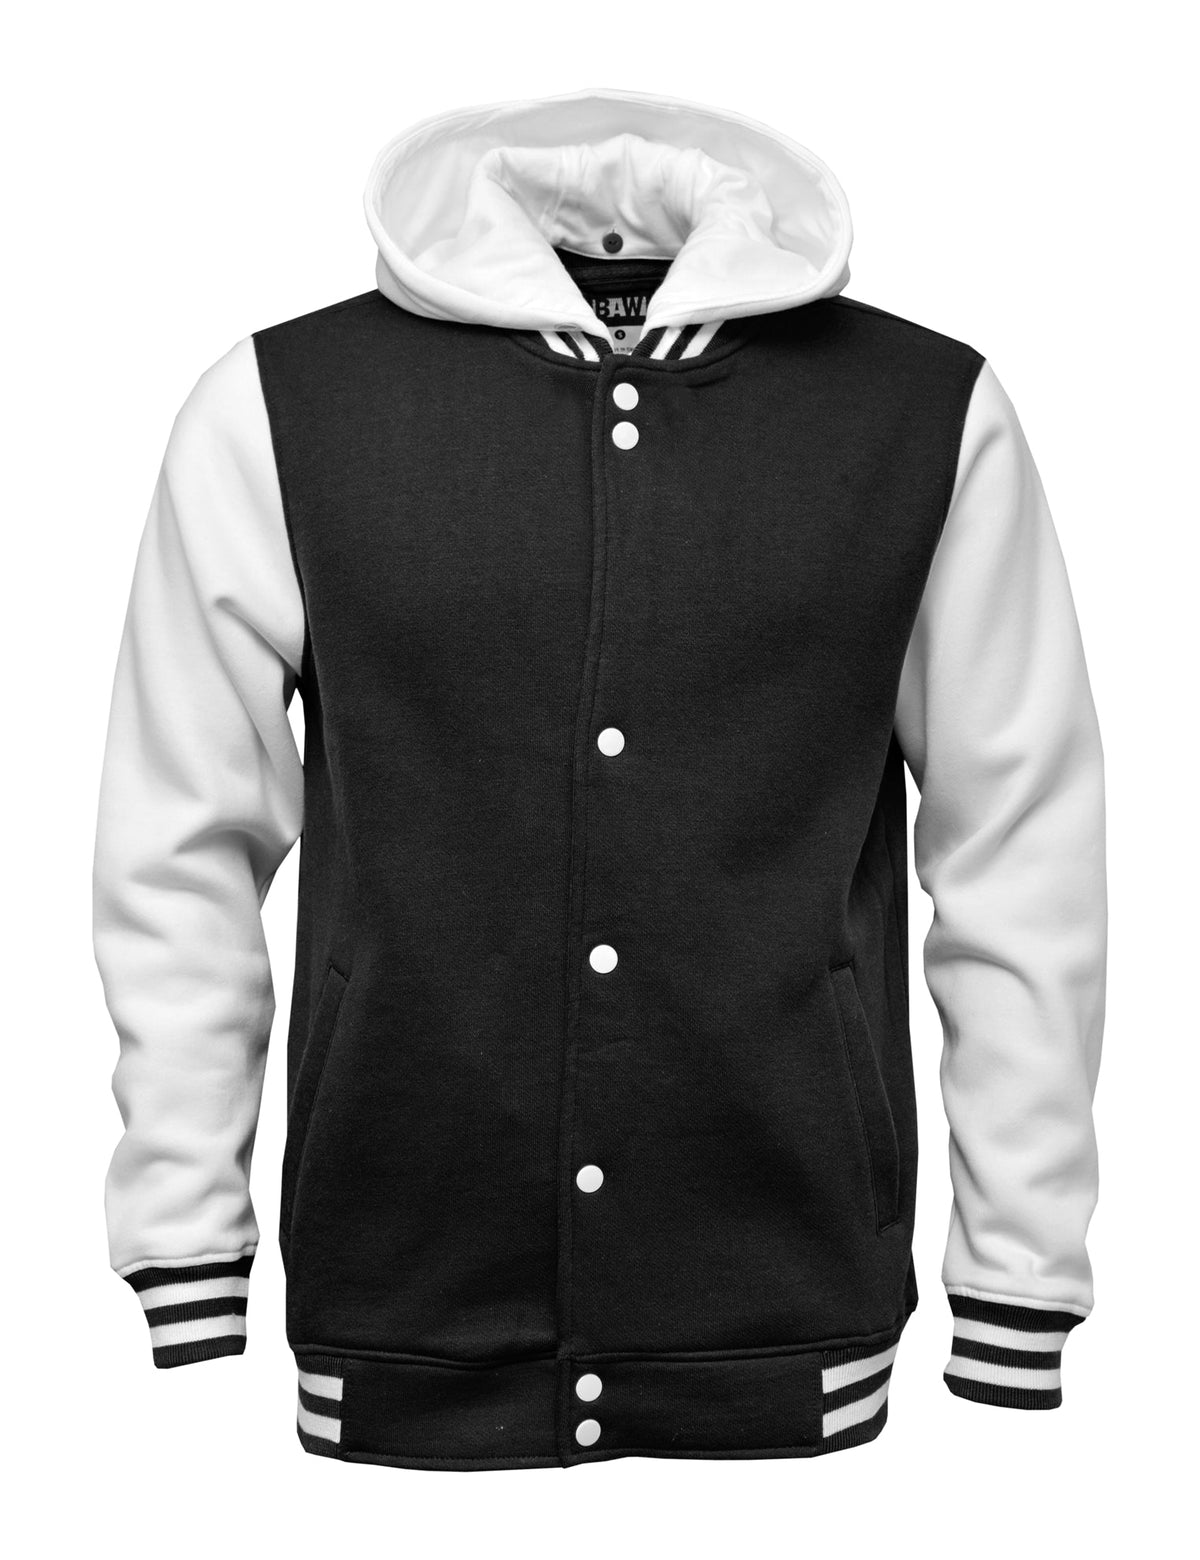 The World of Dance and Talent Varsity Jacket with Hood - Adult Unisex